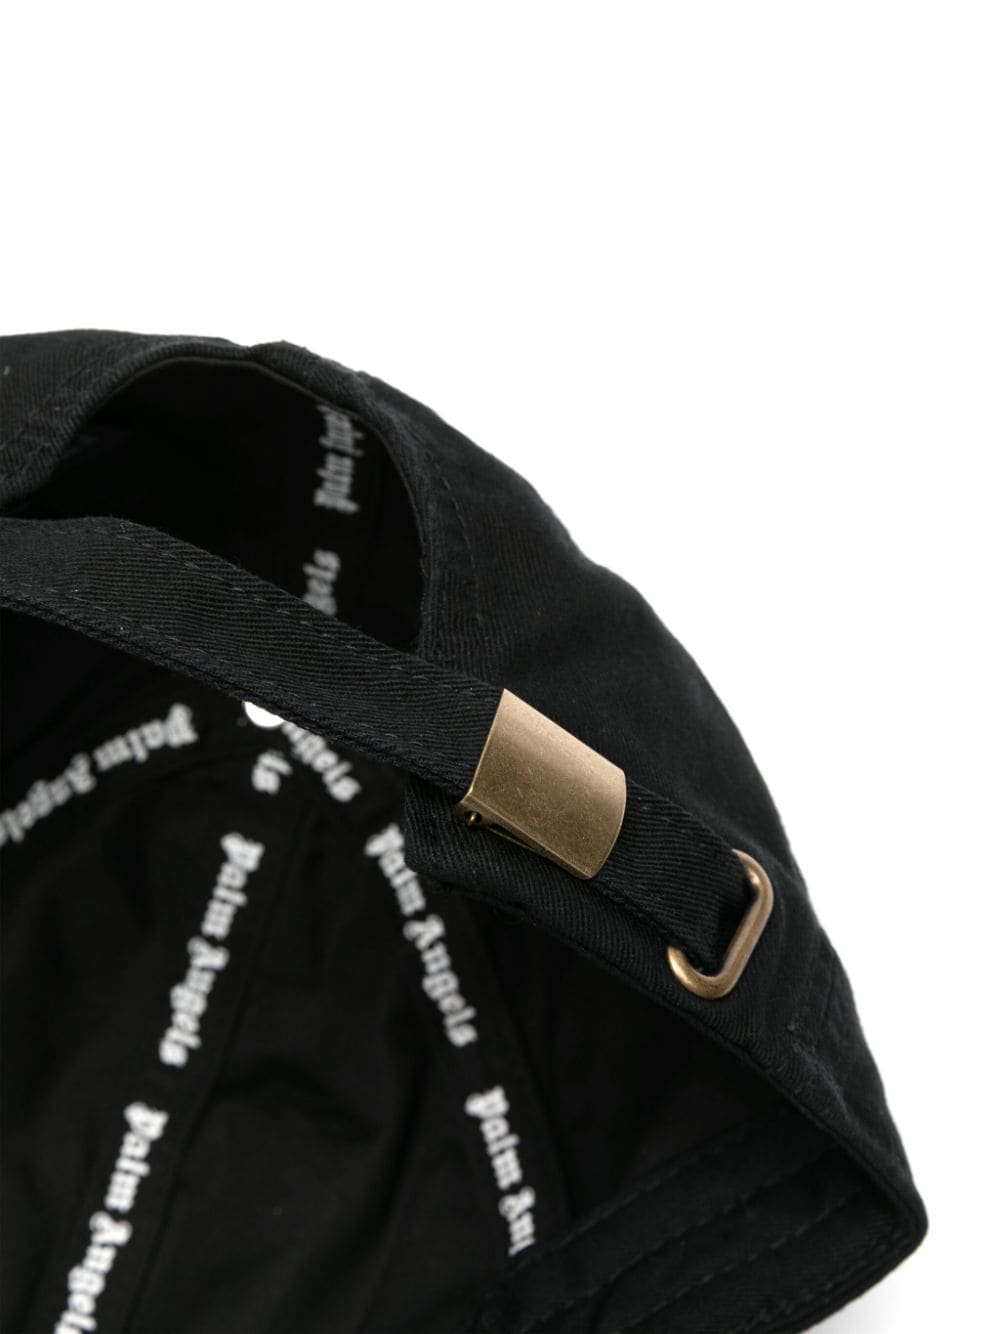 Embroidered logo to the front cap